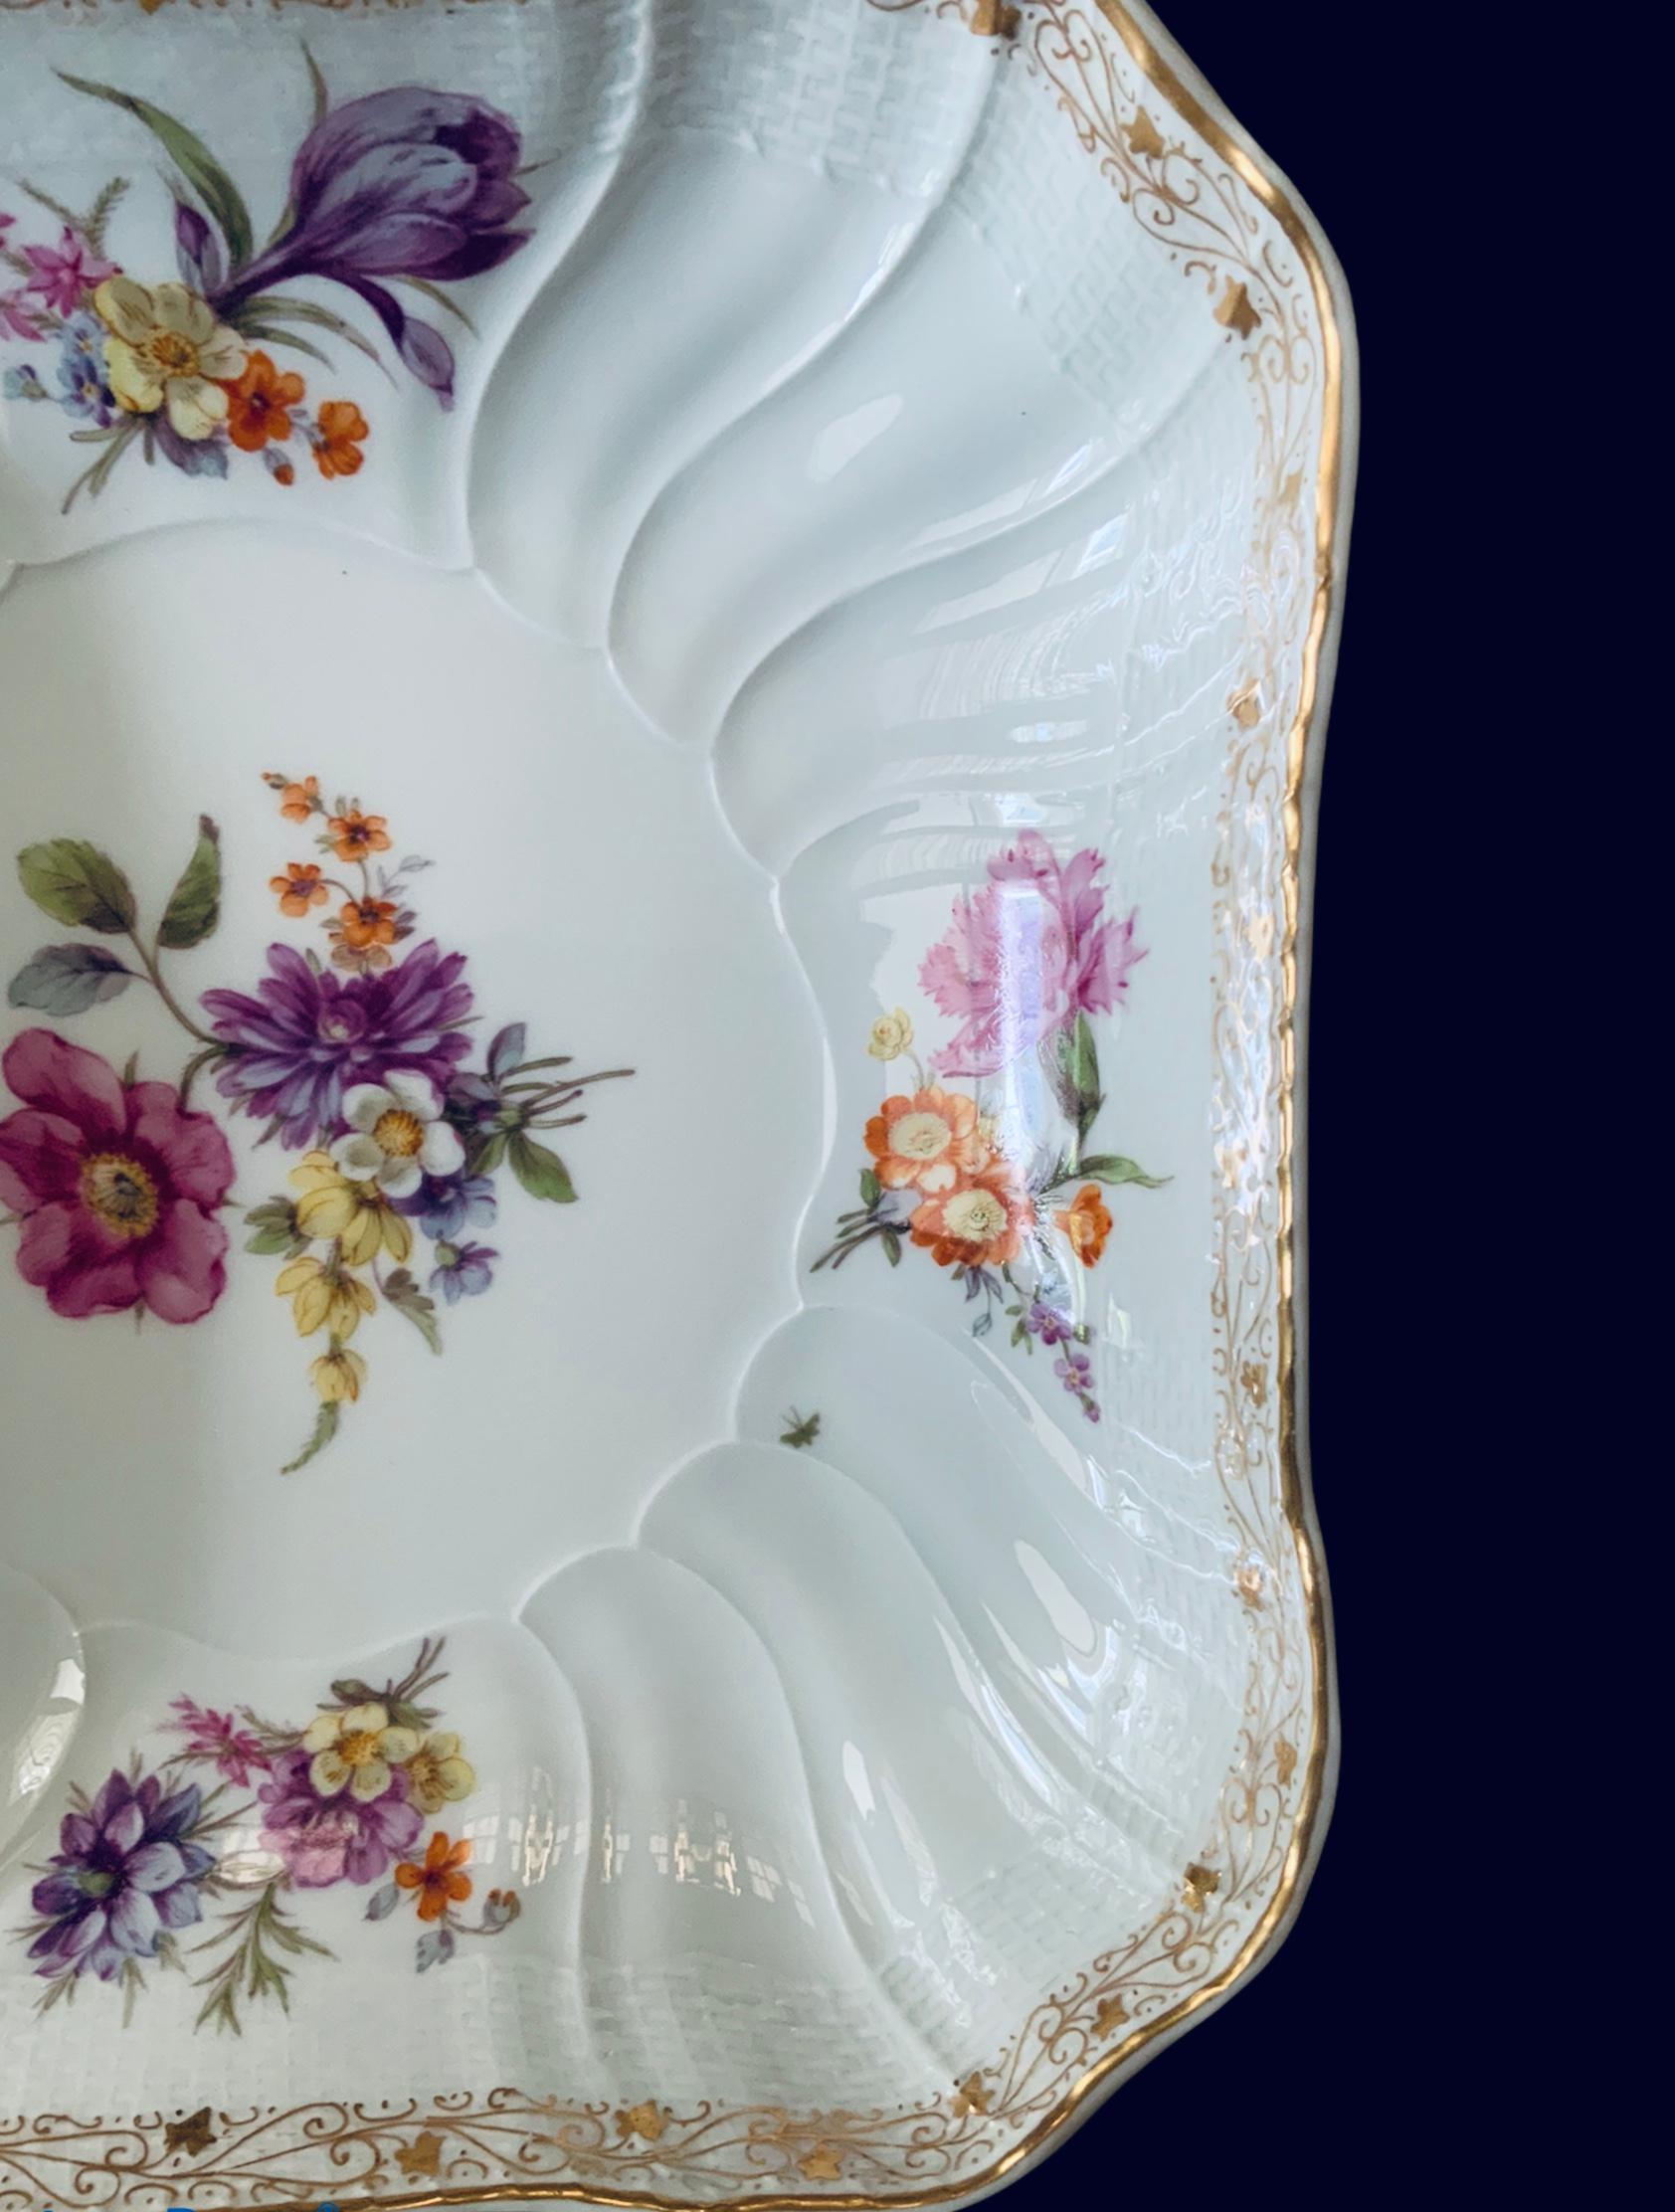 This is a KPM Porcelain large octagonal bowl. It depicts a large bouquet of flowers in the center and four small ones around the border. A delicate gilt vine of hearts and ivy leaves embellish the border in addition of the spiral and basket weave